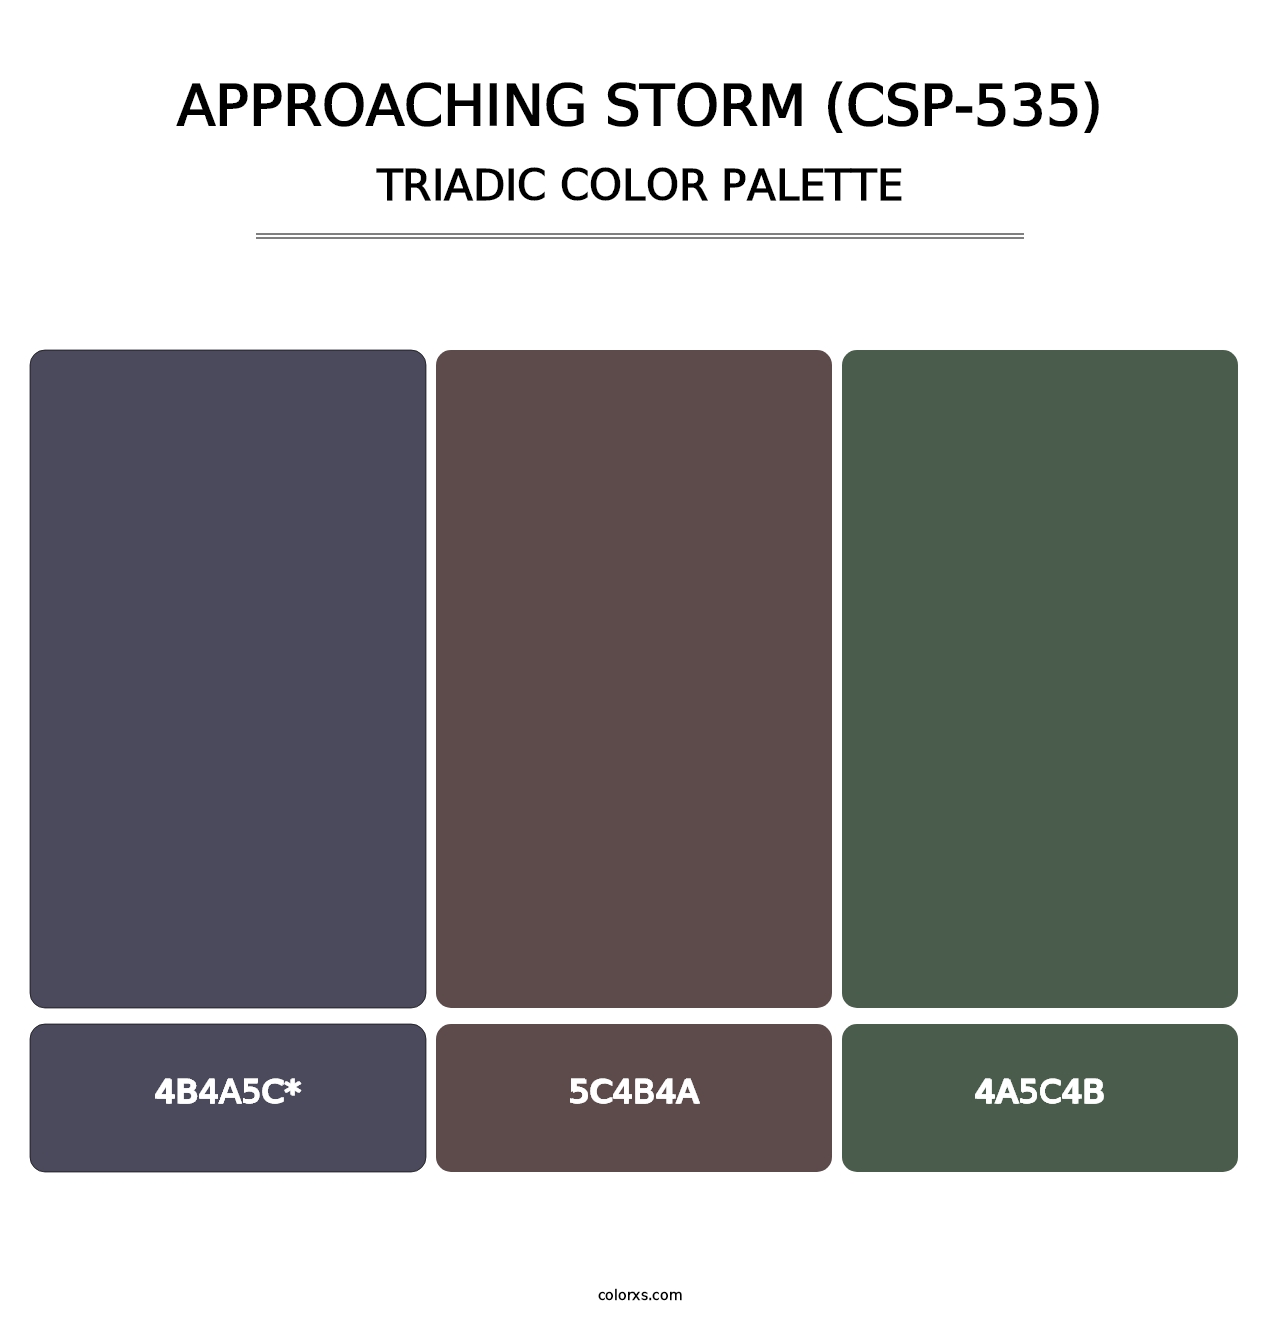 Approaching Storm (CSP-535) - Triadic Color Palette